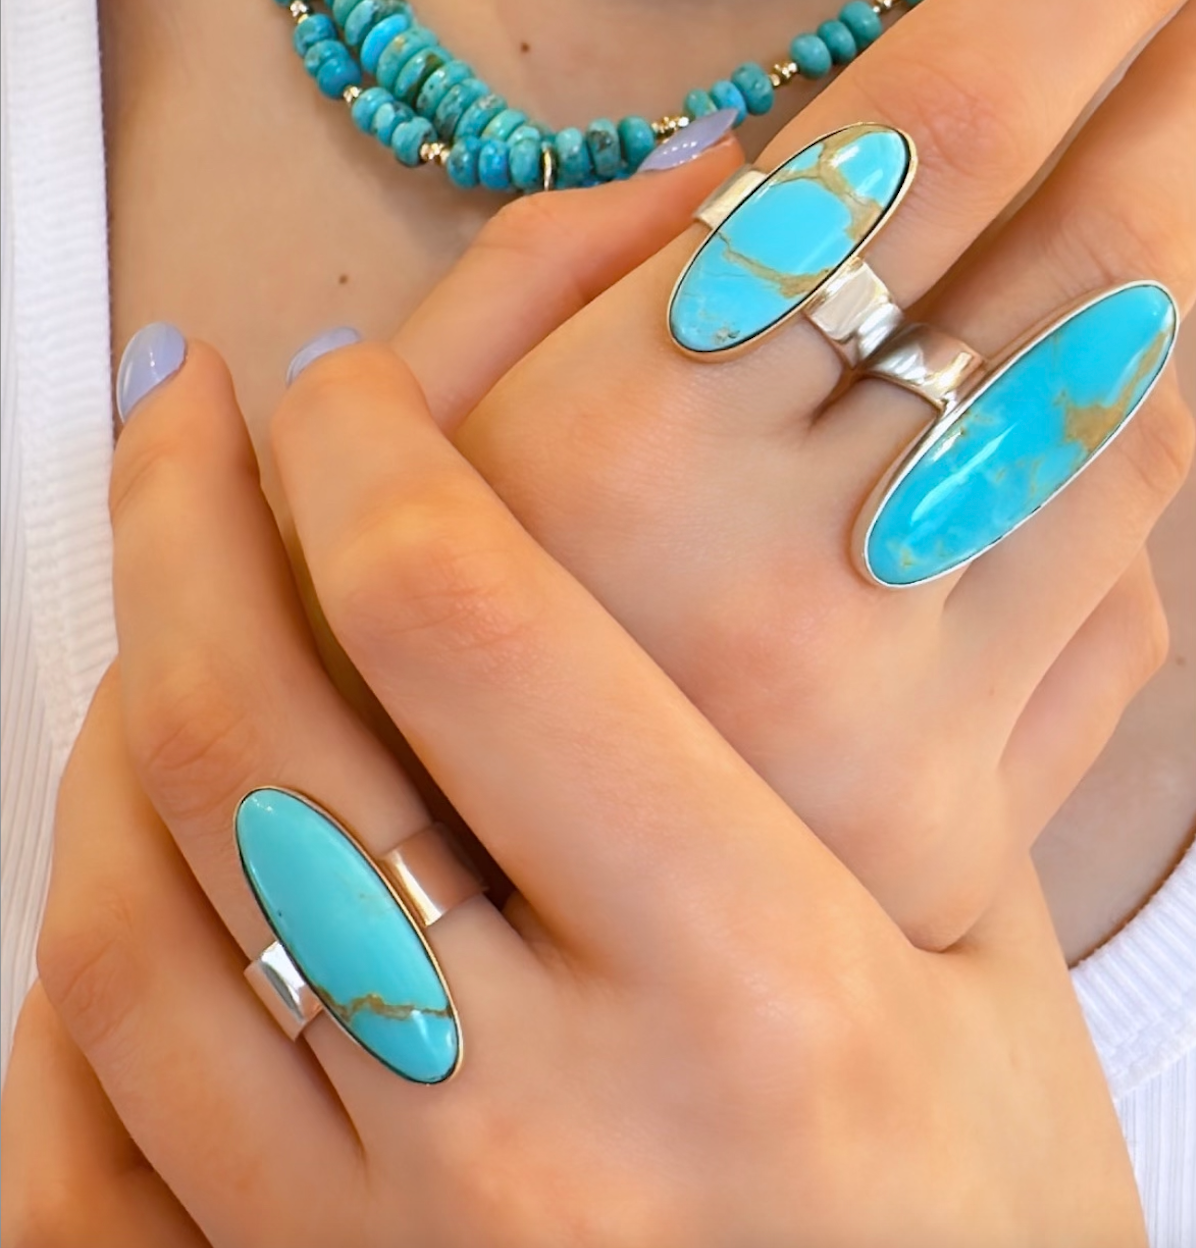 TURQUOISE RINGS